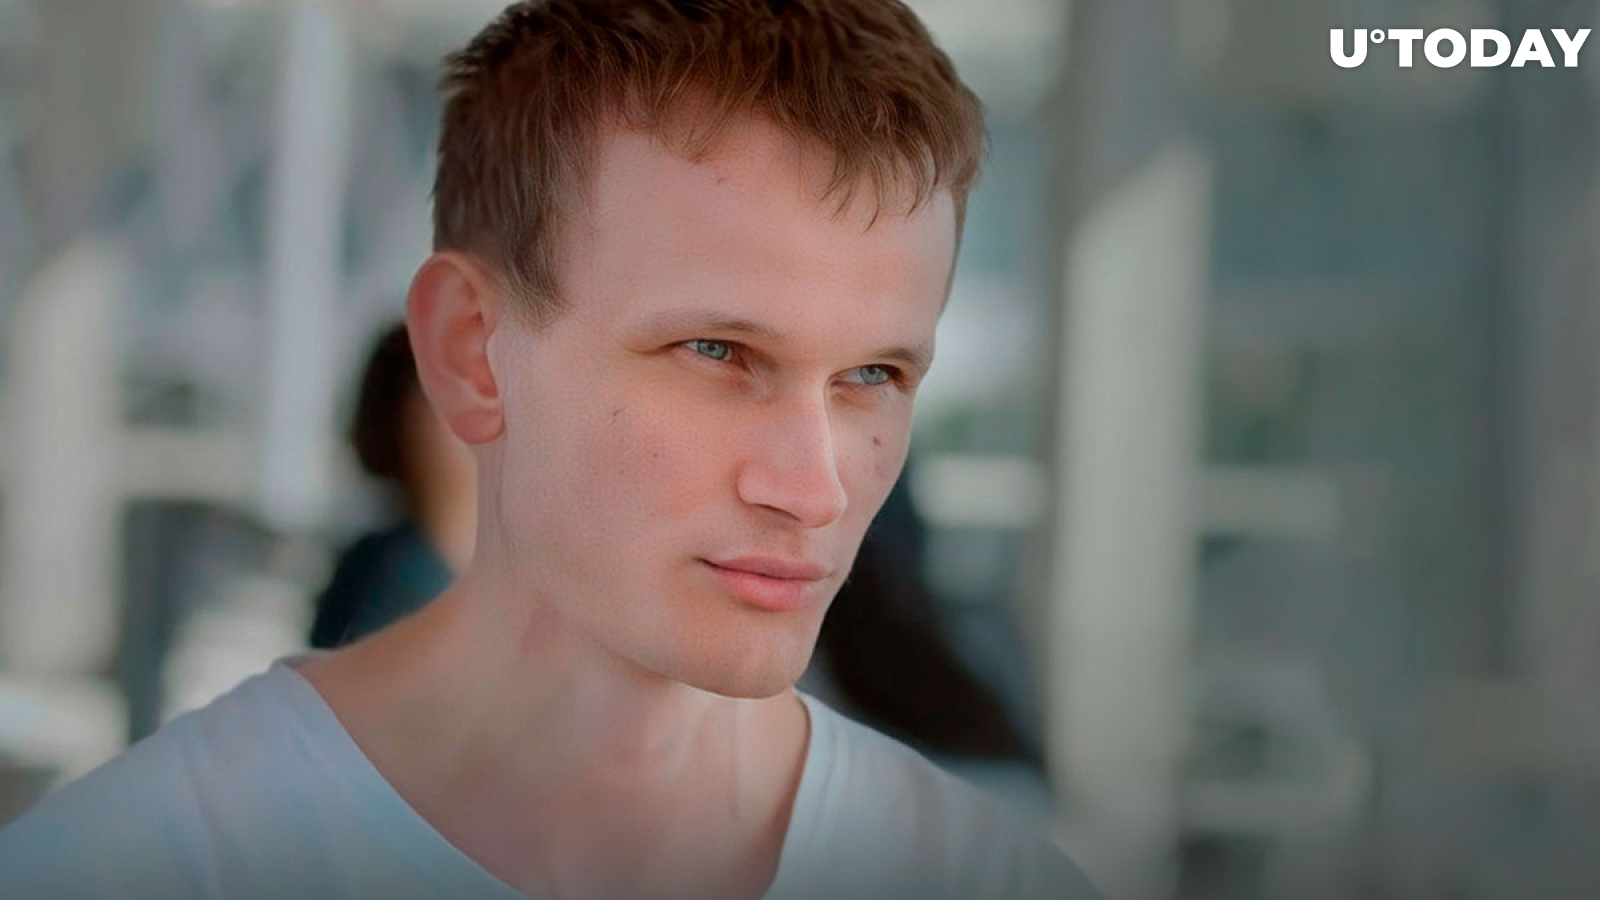 Is Dogecoin Next? Ethereum's Vitalik Buterin Says Meme Coin Should Move to Proof-of-Stake